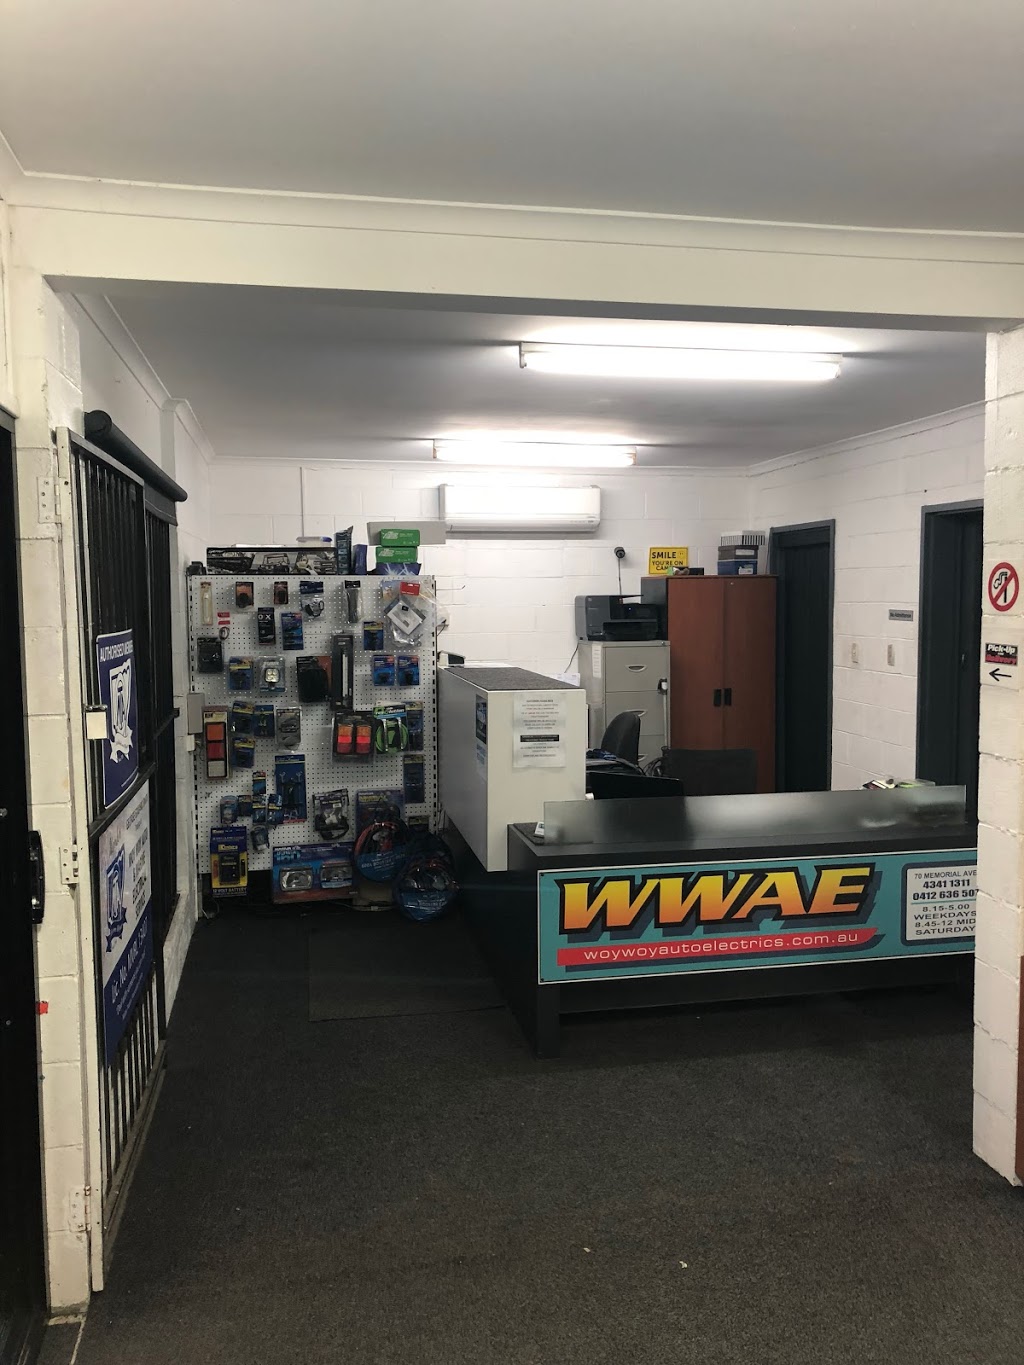 Woy Woy Auto Electrics and Car Air-Conditioning | 70 Memorial Ave, Blackwall NSW 2256, Australia | Phone: (02) 4341 1311